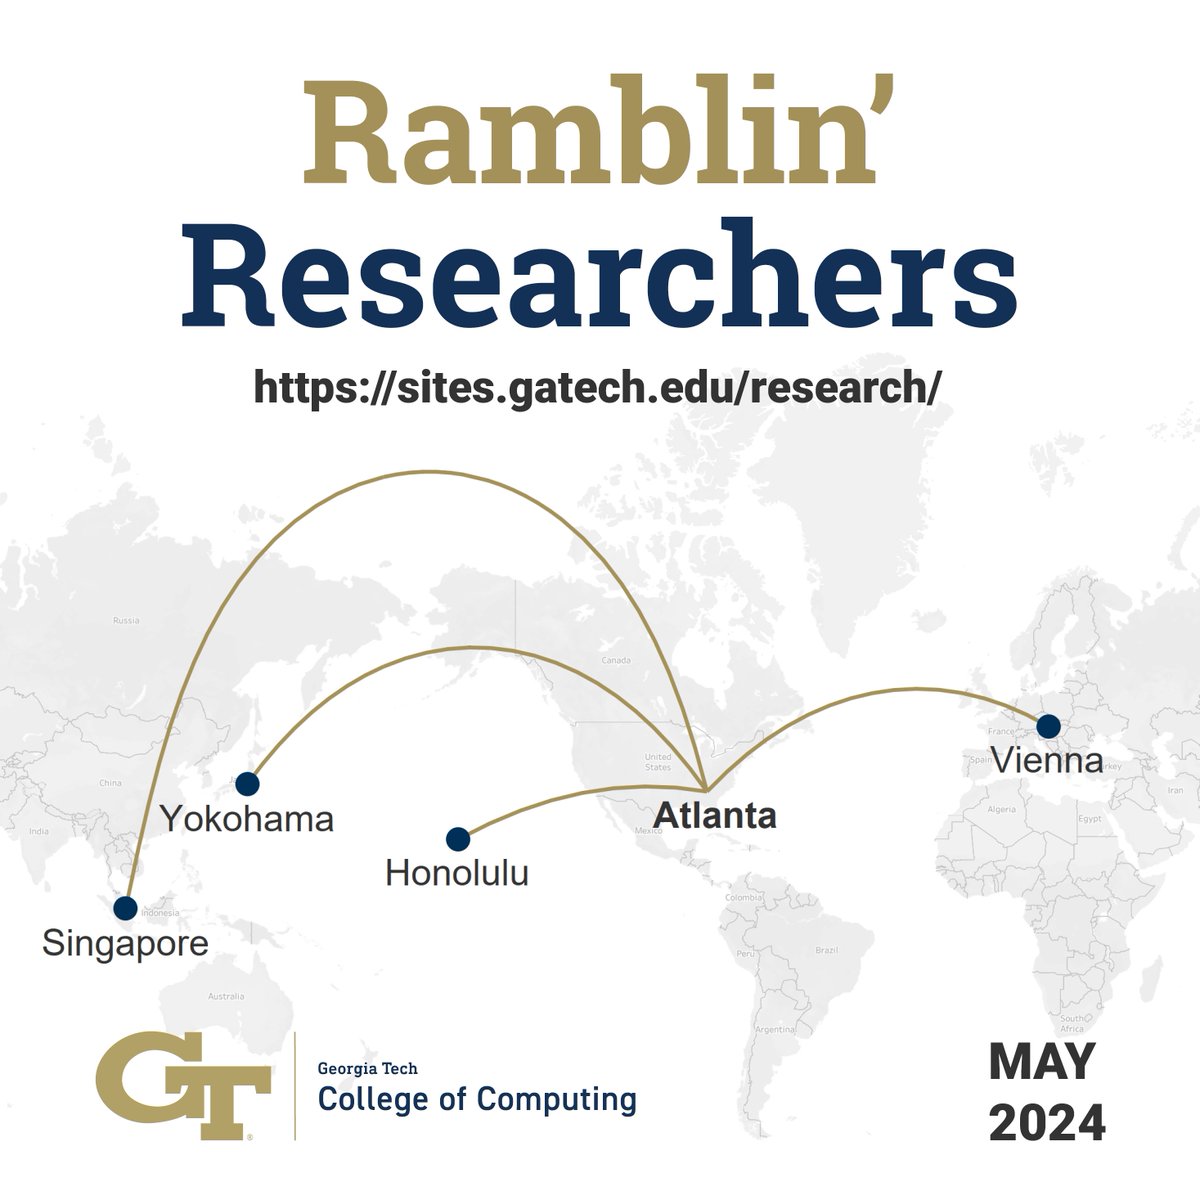 This May, our experts are presenting new research to international audiences on topics in deep learning, #HCI, robotics, and more. RESPECT 2024 is being hosted by @GeorgiaTech, led by @GT_CCEC. Meet some of our ramblin’ researchers! #TogetherWeSwarm 🐝sites.gatech.edu/research/